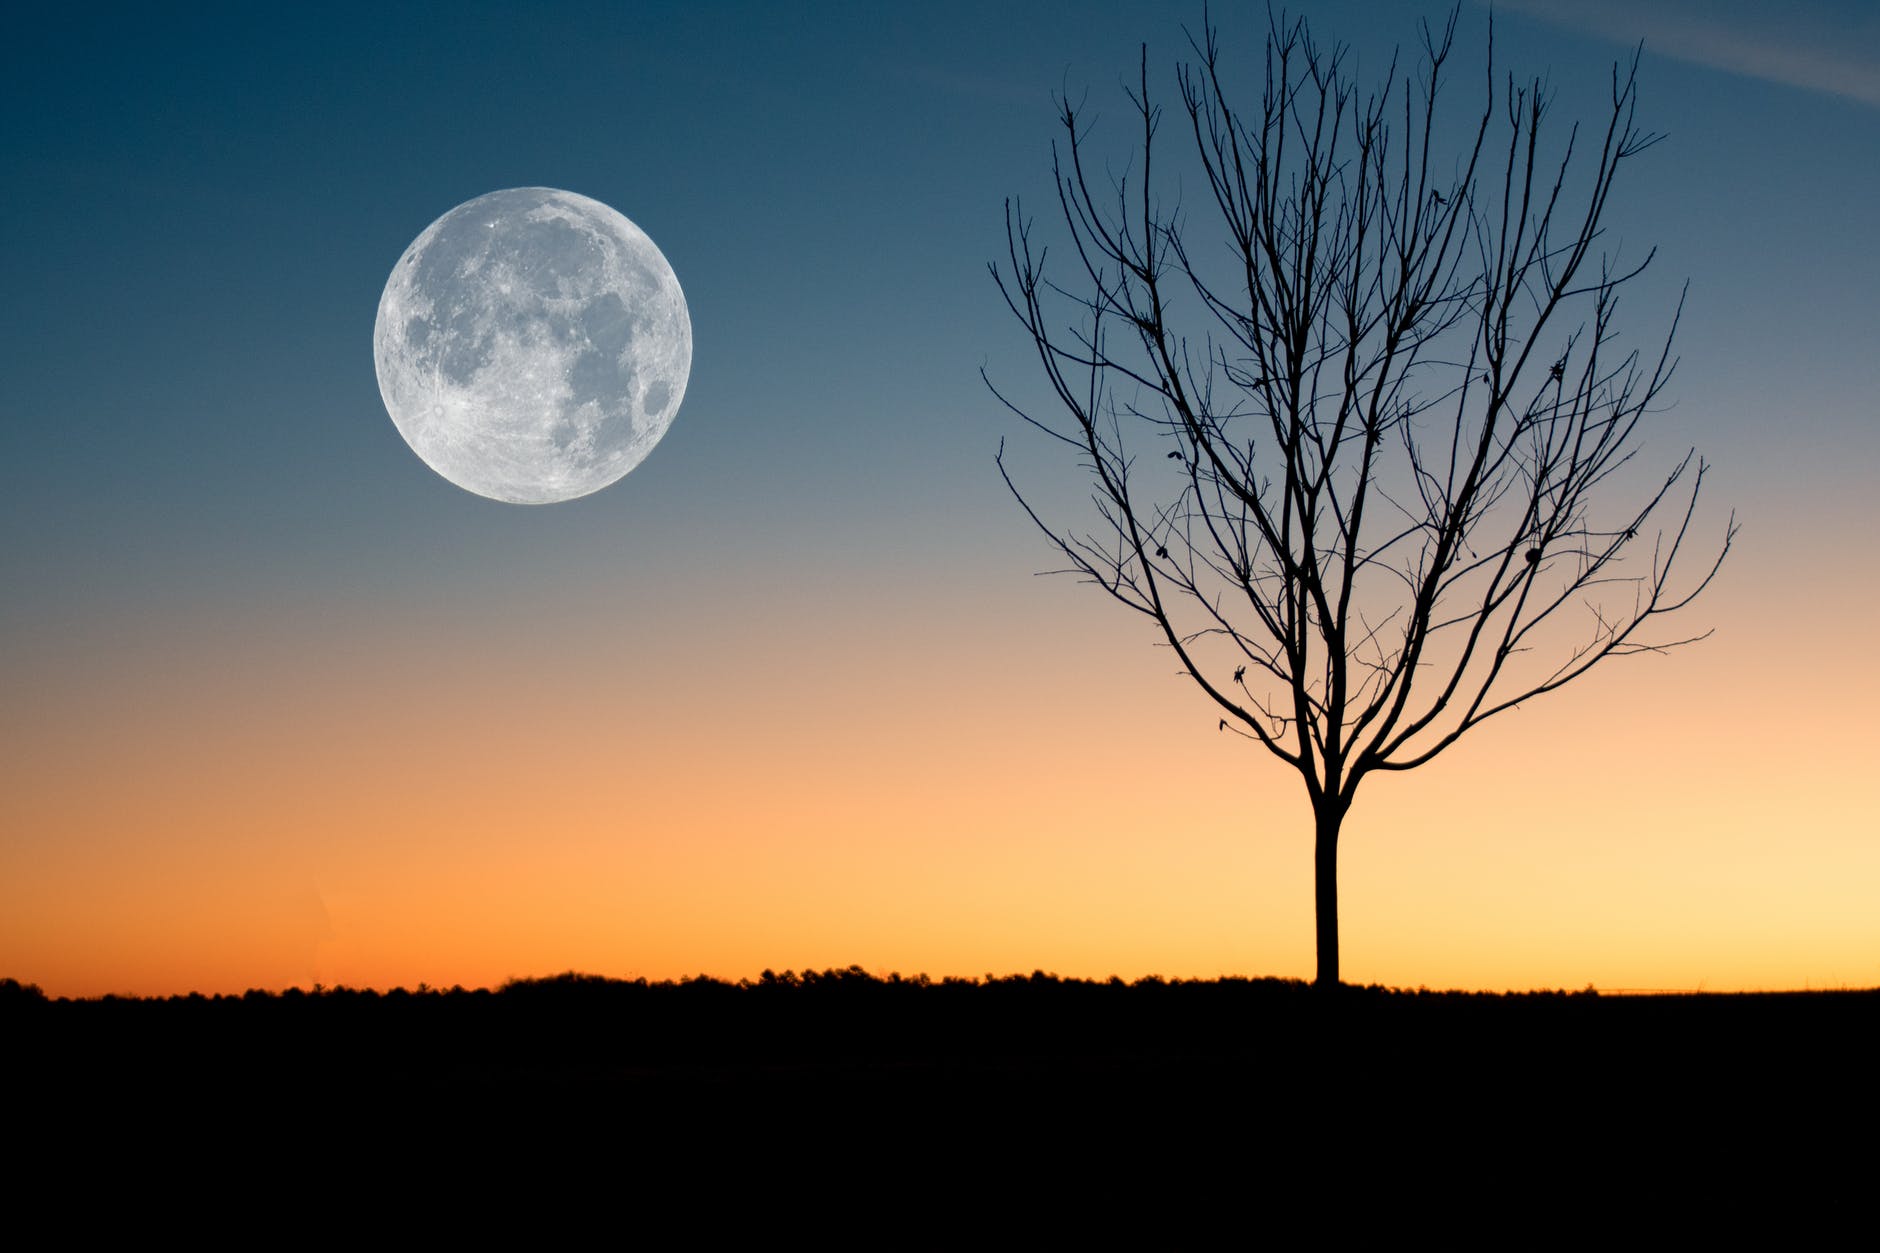  Here Are 5 Ways a Full Moon Can Affect Your Mood